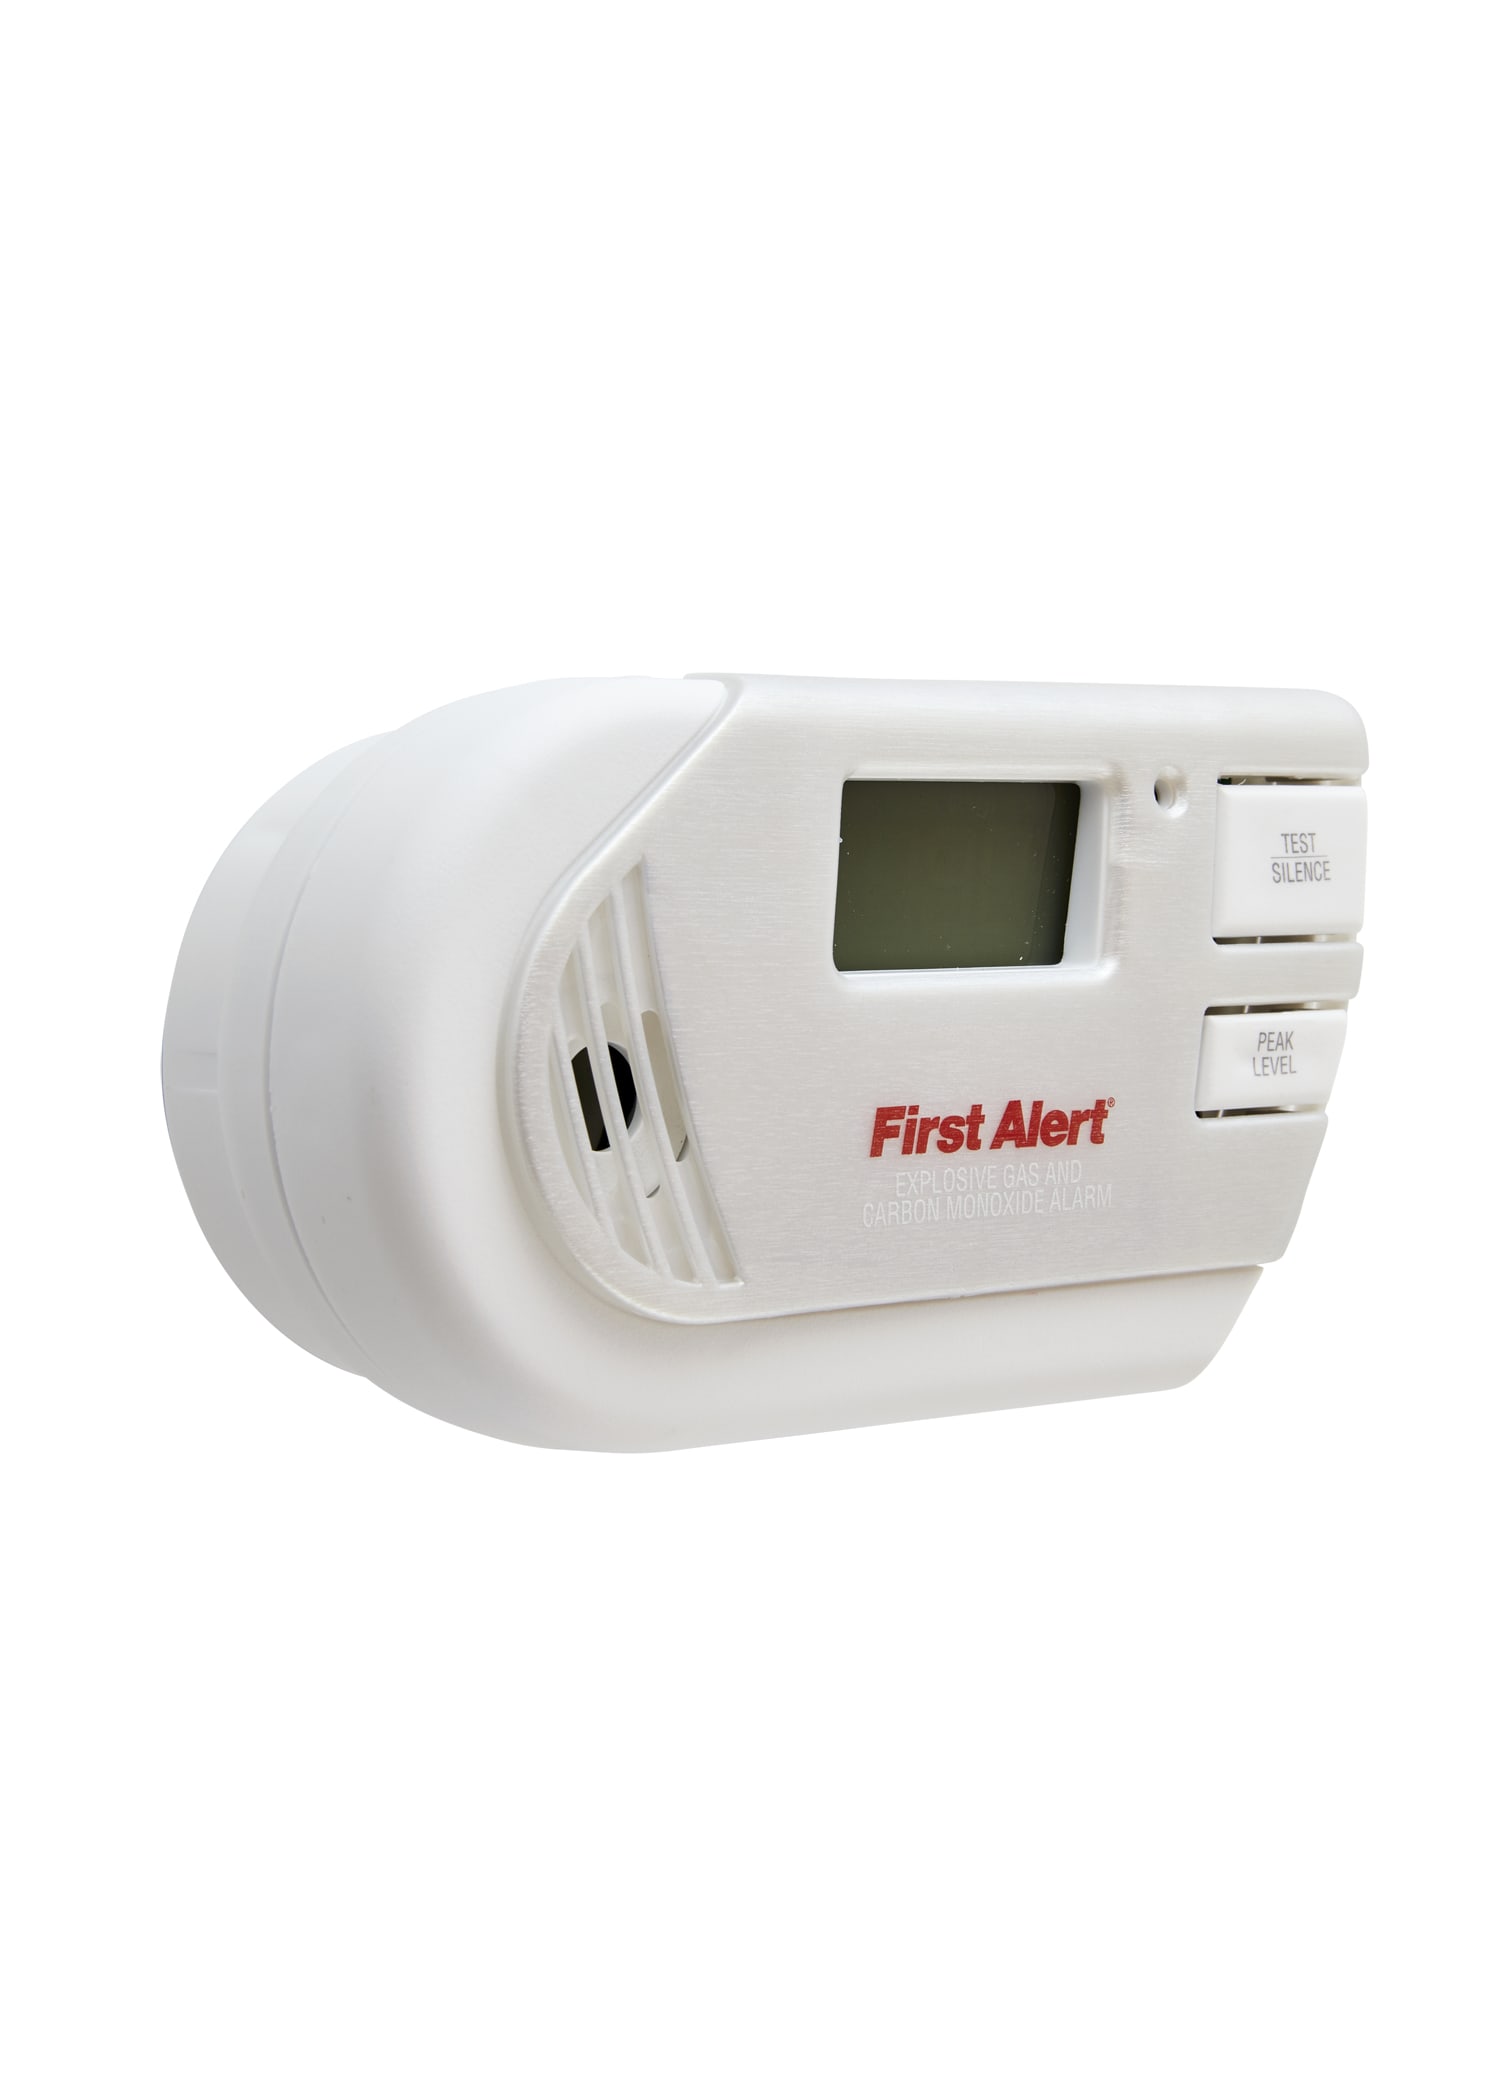 First Alert GCO1CN Combination Explosive Gas and Carbon Monoxide Alarm with Backlit Digital Display - image 2 of 5